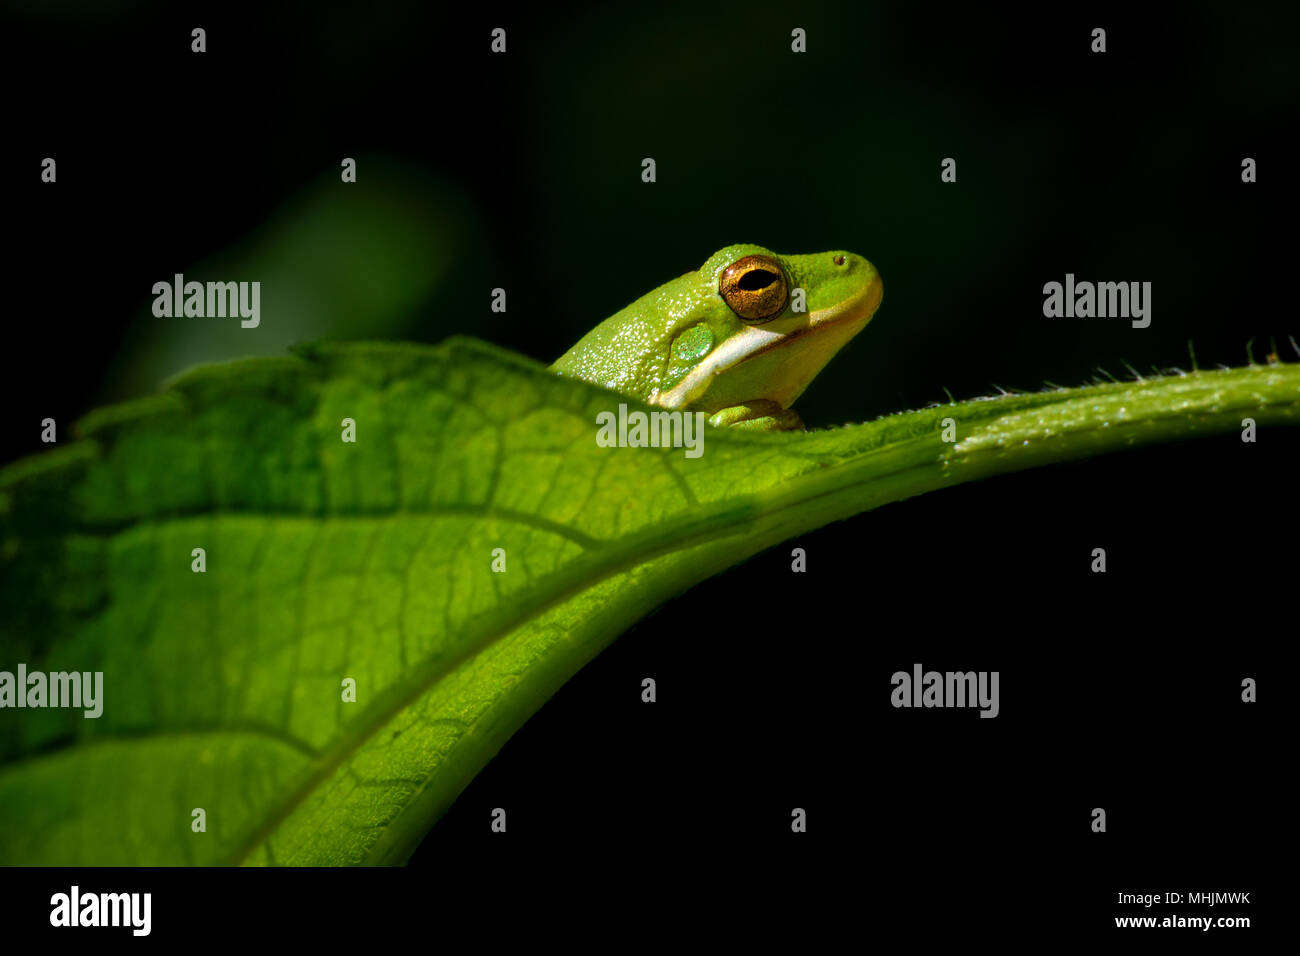 American green tree frog (Hyla cinerea) peering over a leaf. Copy space Stock Photo